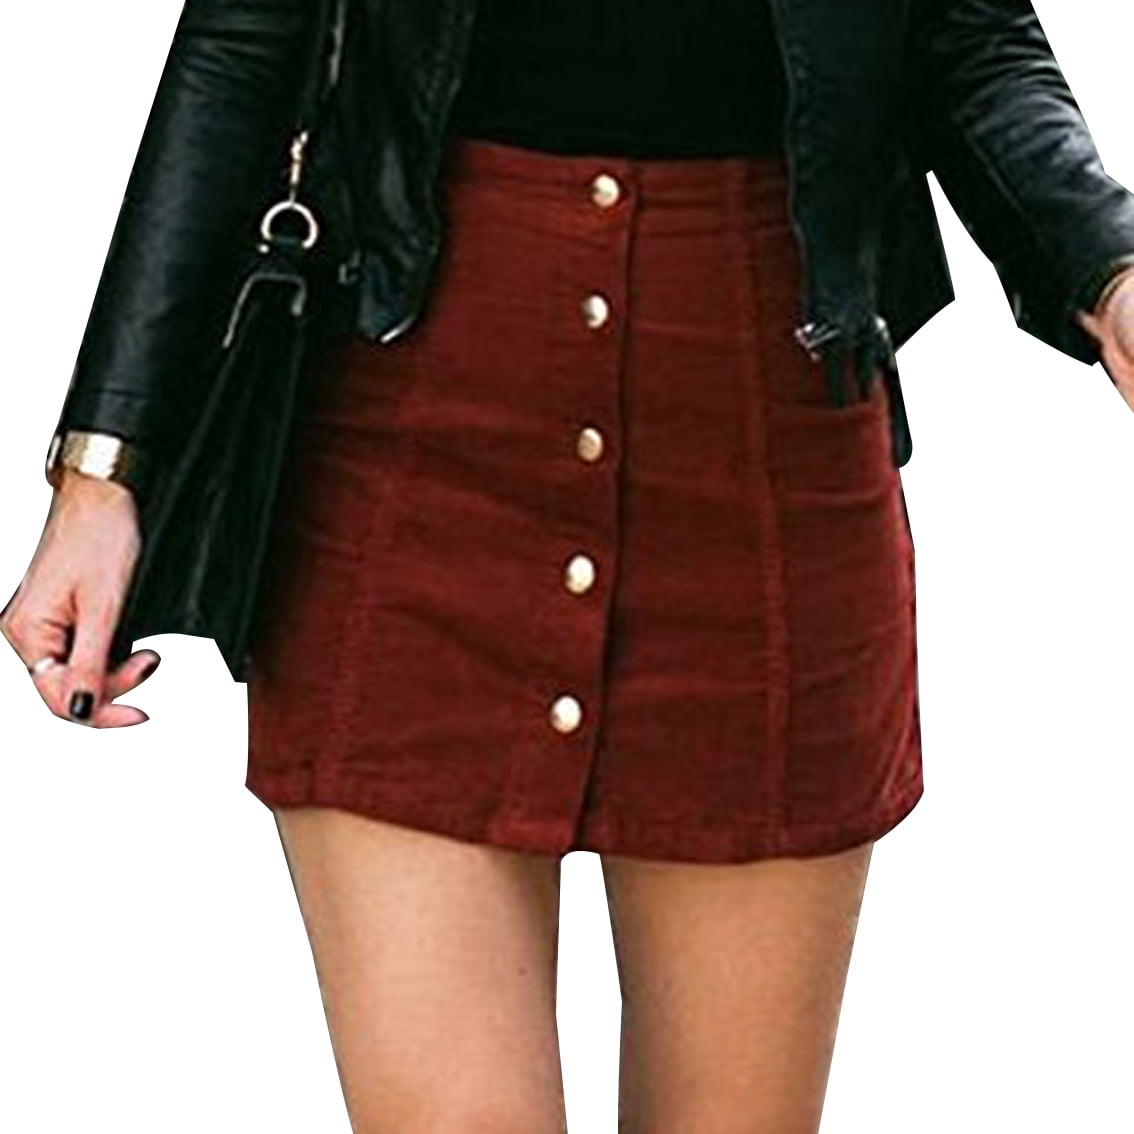 Fashion Double Breasted Suede Winter Autumn Skirts Slim Waist Ladies Pencil Skirts High Waist Women Casual Skirt